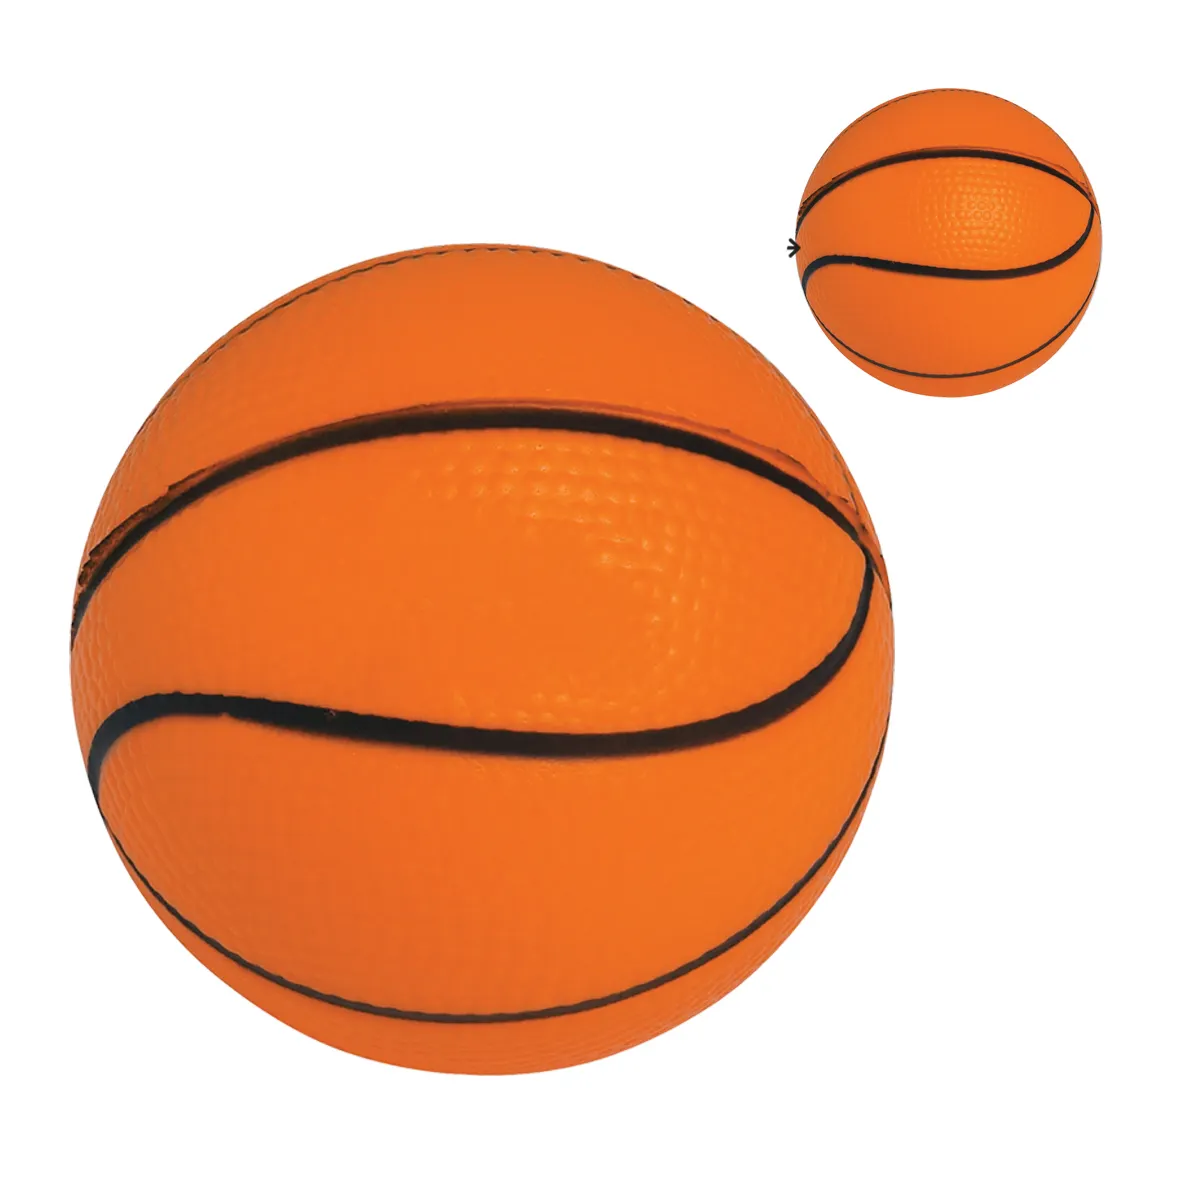 Pu Foam Antistress Football Basketball Kids Adult Mini Sports Party Favor Toy Stress Balls For Promotional